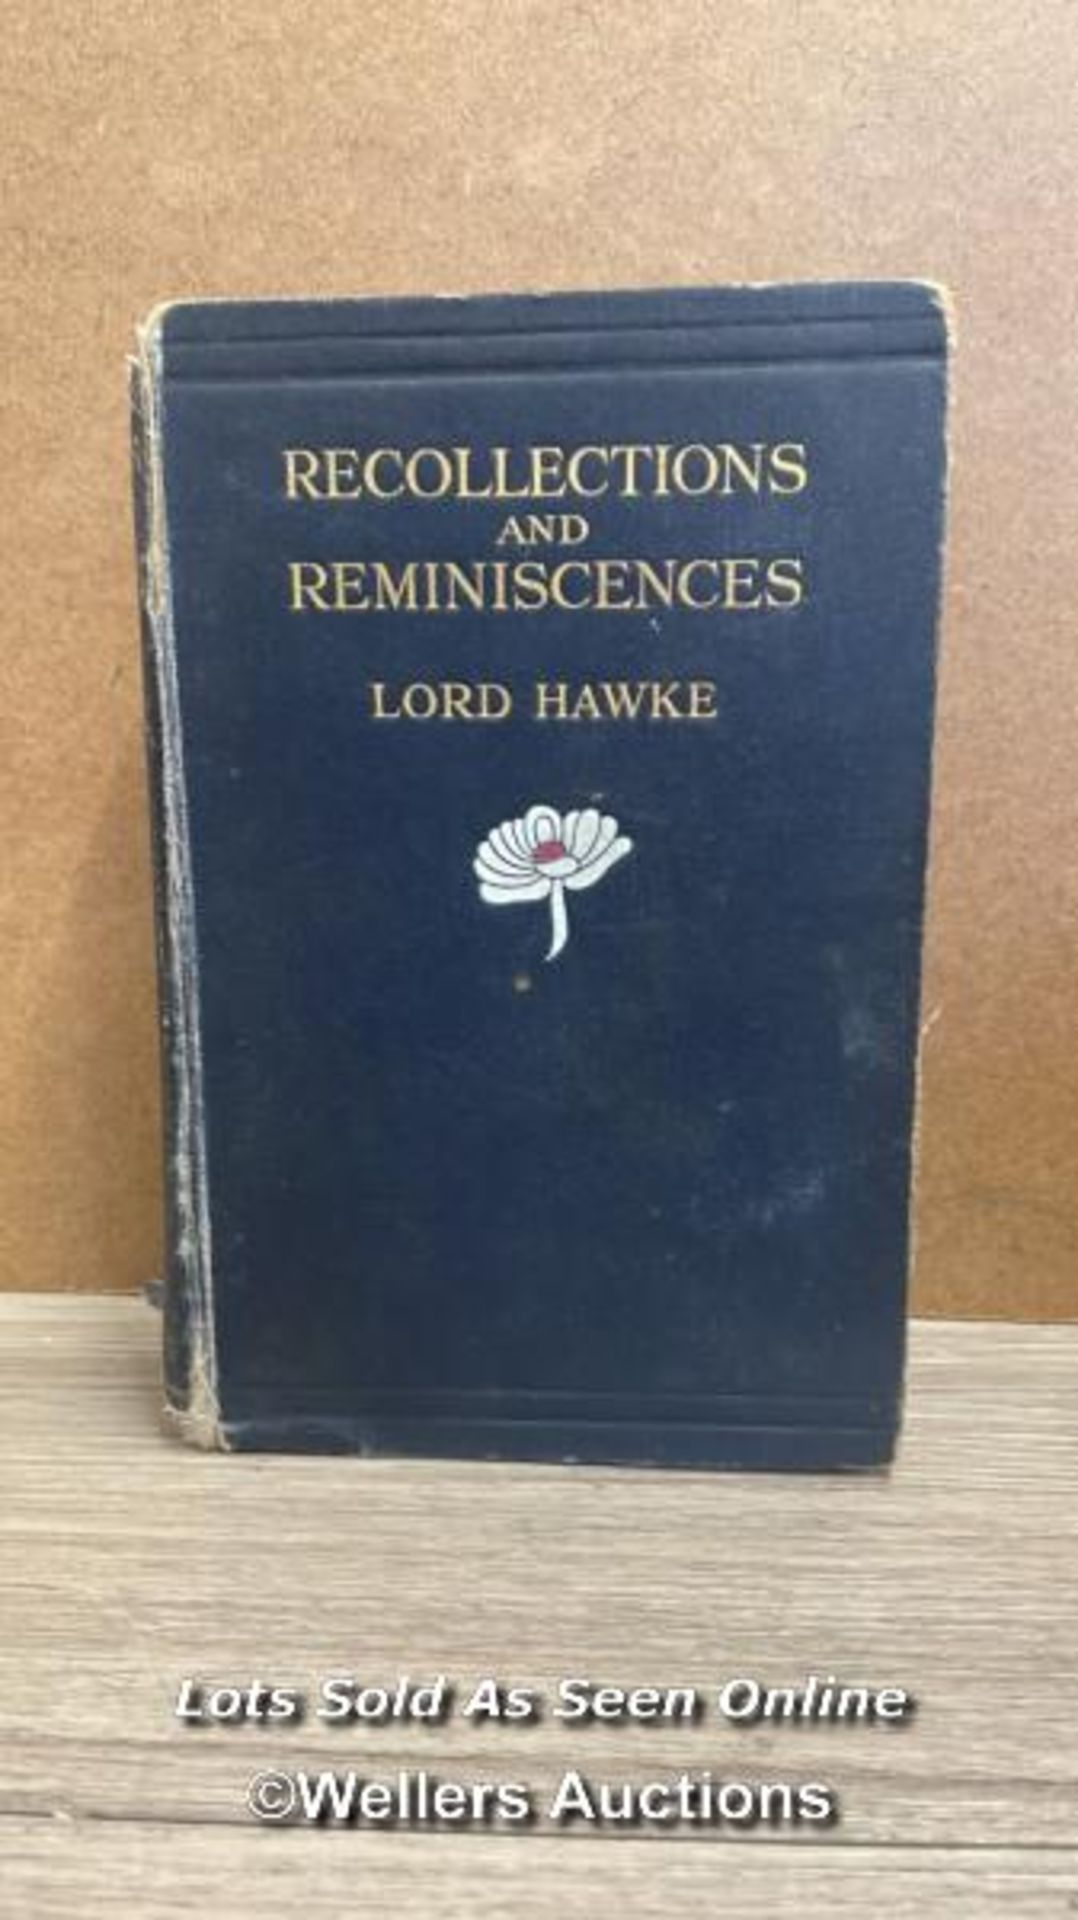 CRICKET - RECOLLECTIONS & REMINISCENCES BY LORD HAWKE SECOND IMPRESSION 1924